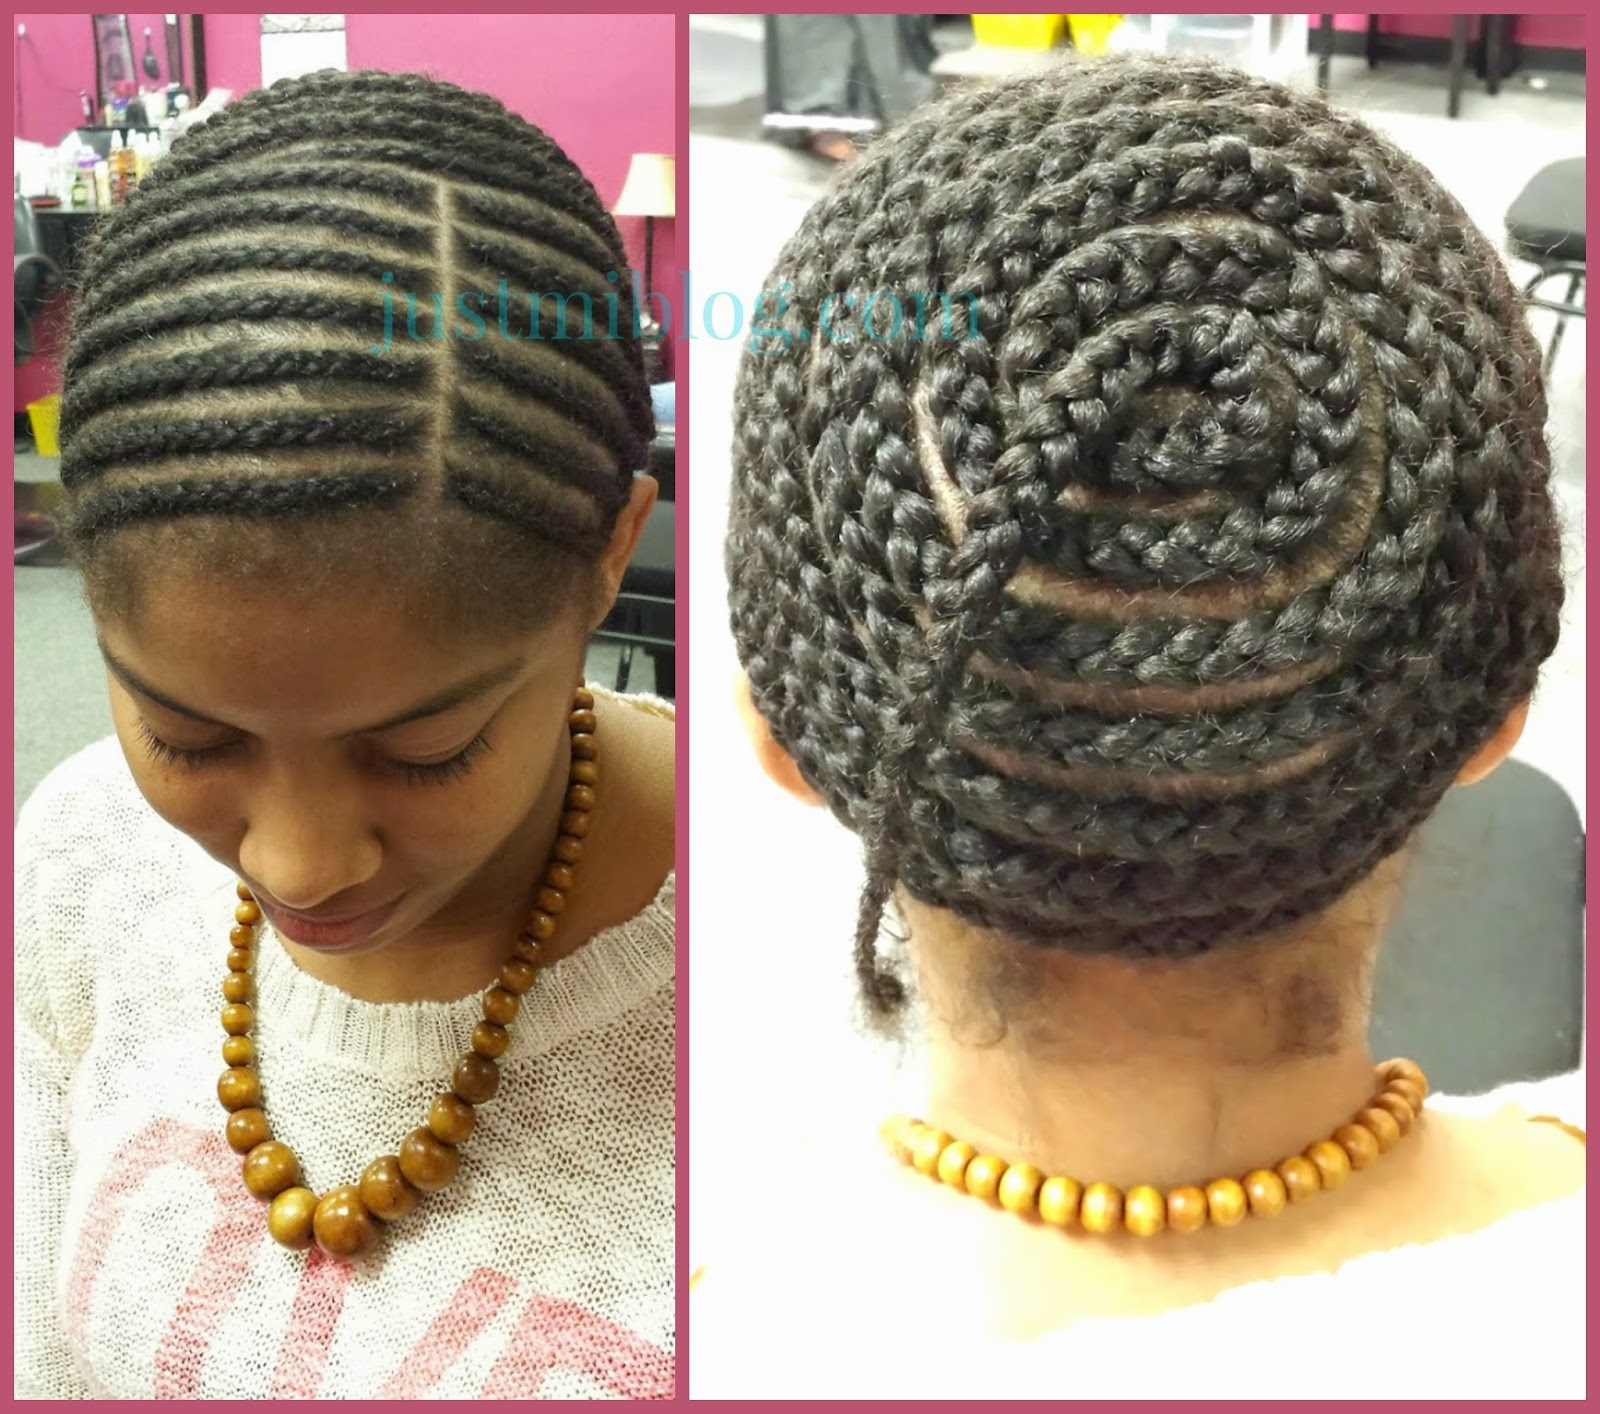 Crochet Braids Braid Pattern Crochet Braid Patterns To Try Out